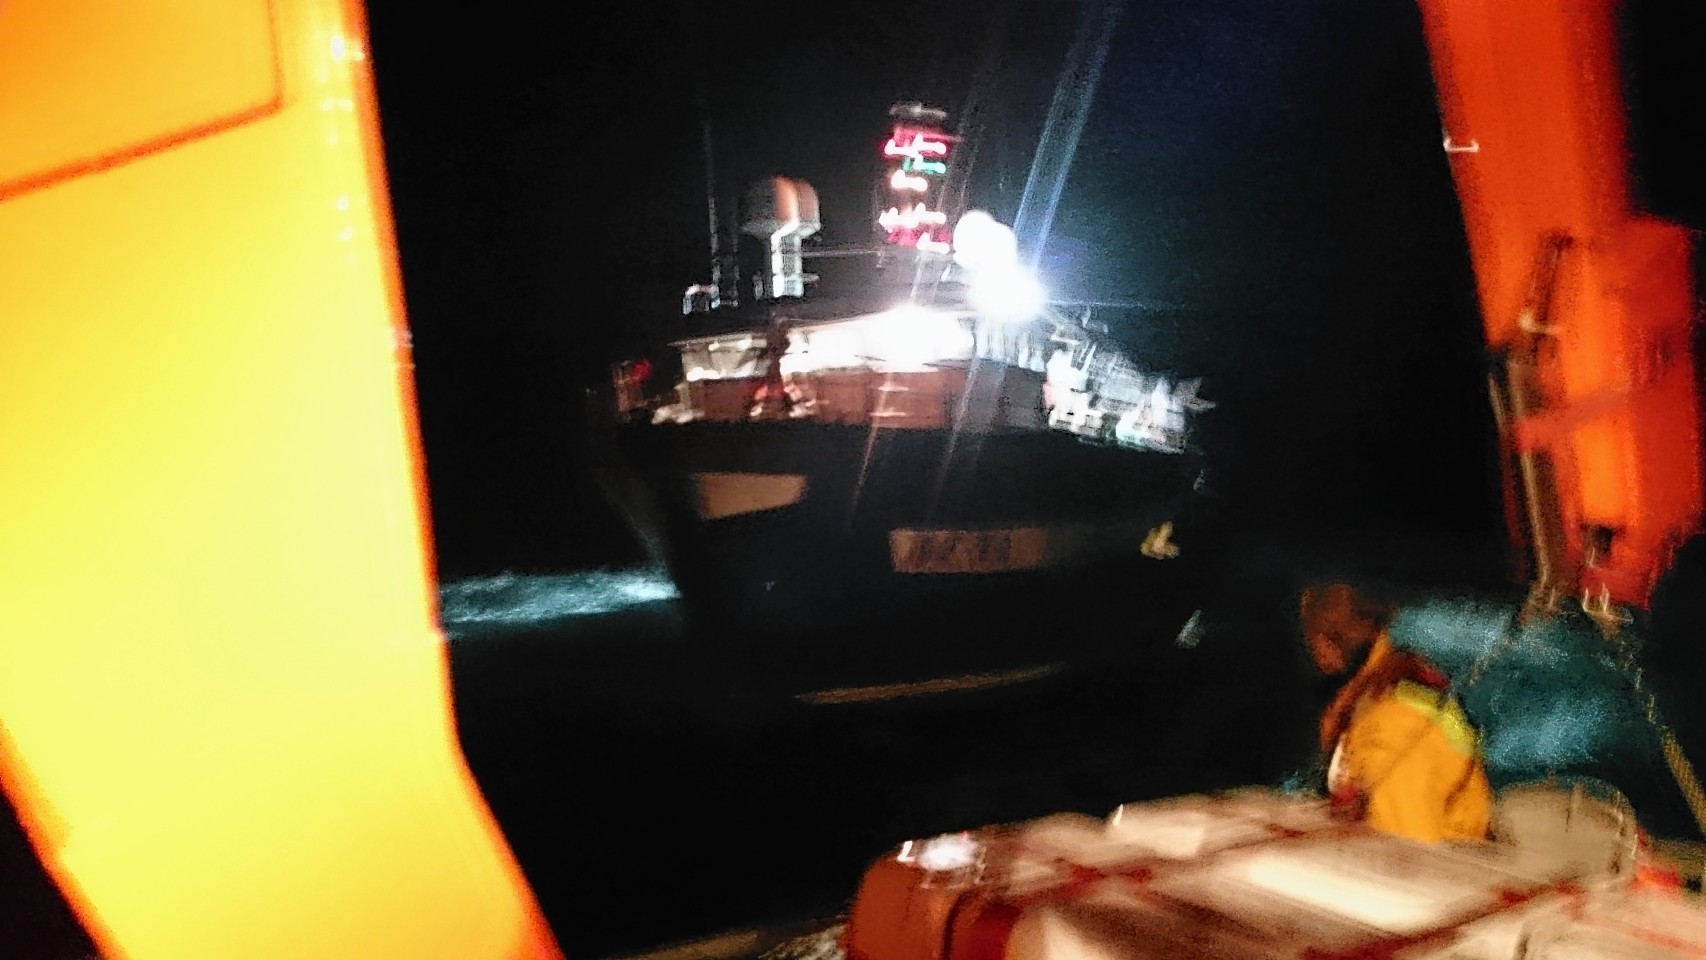 Stromless lifeboat volunteers towed the fishing boat to safety